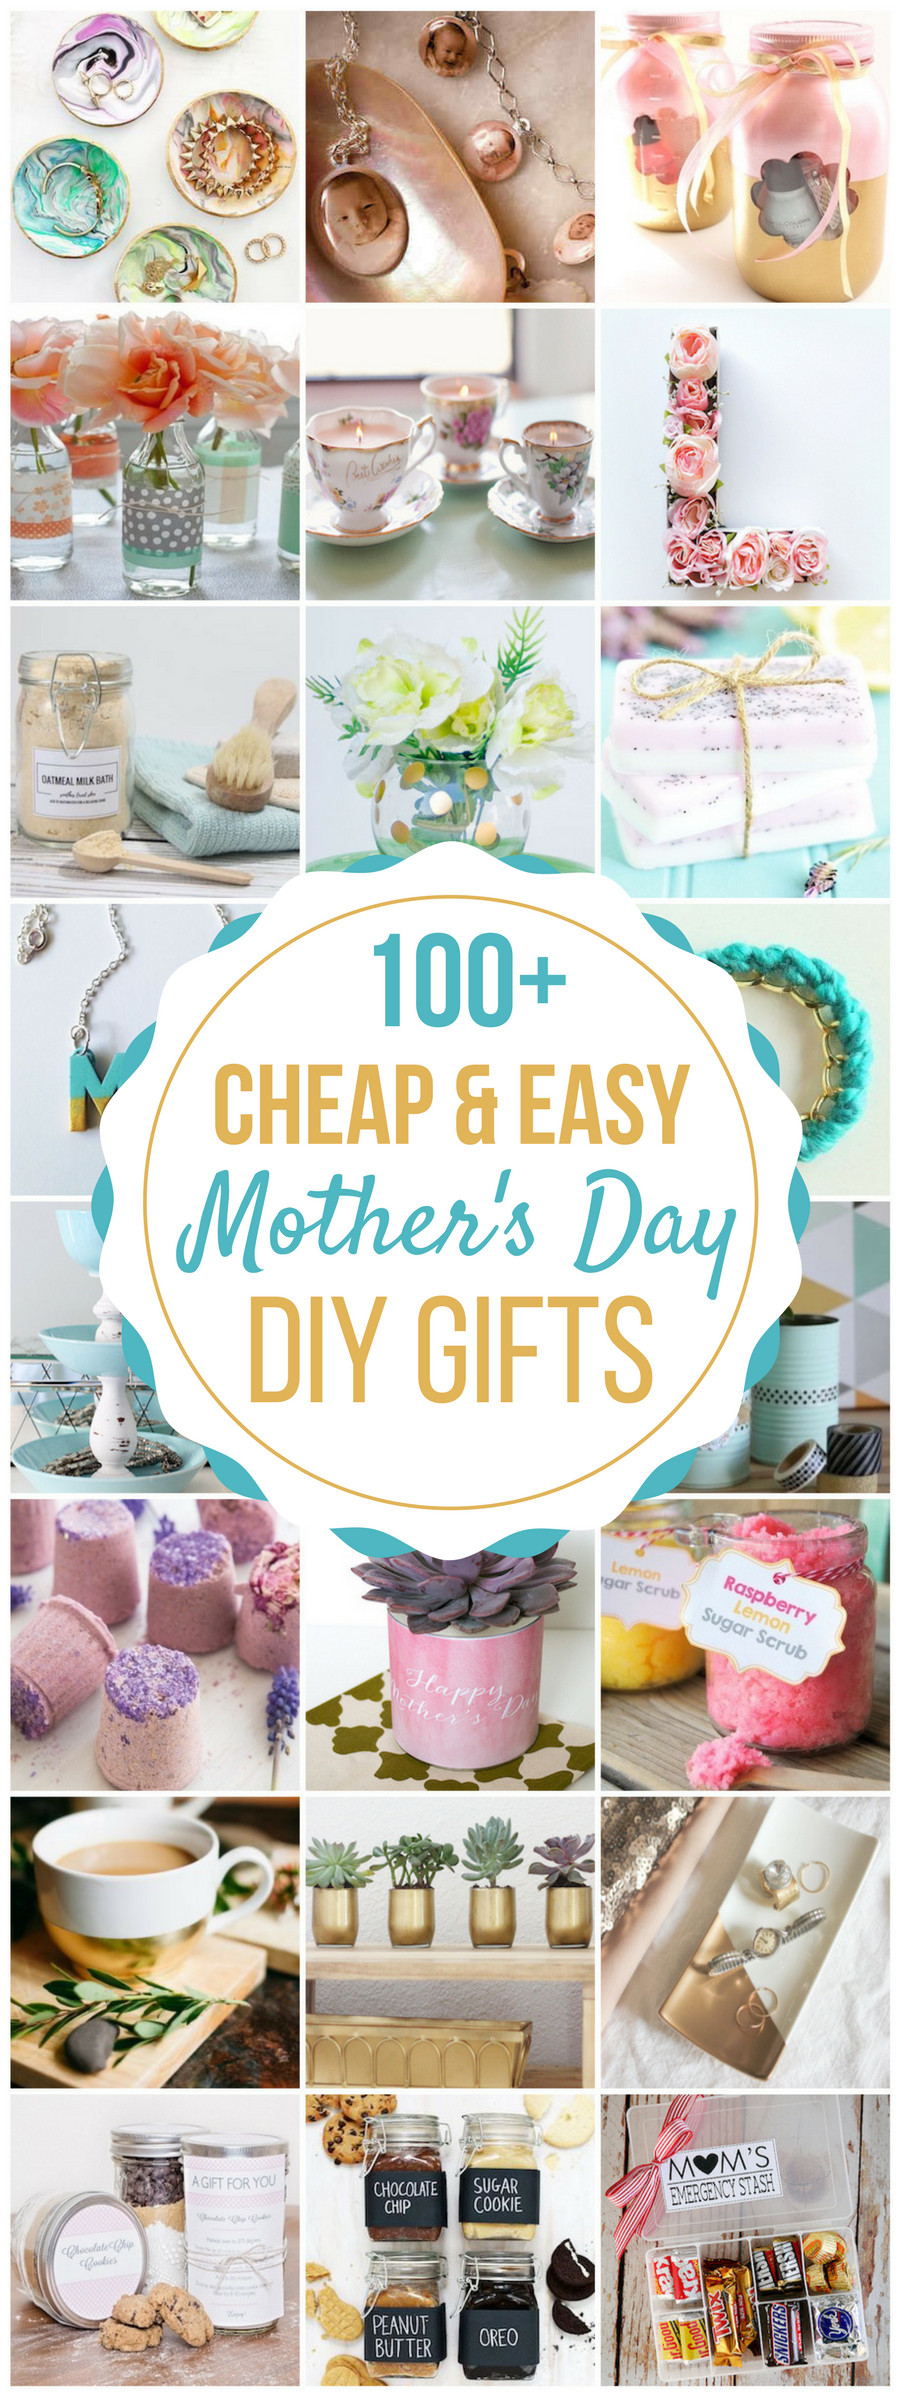 DIY Mothers Day Gifts Easy
 100 Cheap & Easy DIY Mother s Day Gifts Prudent Penny